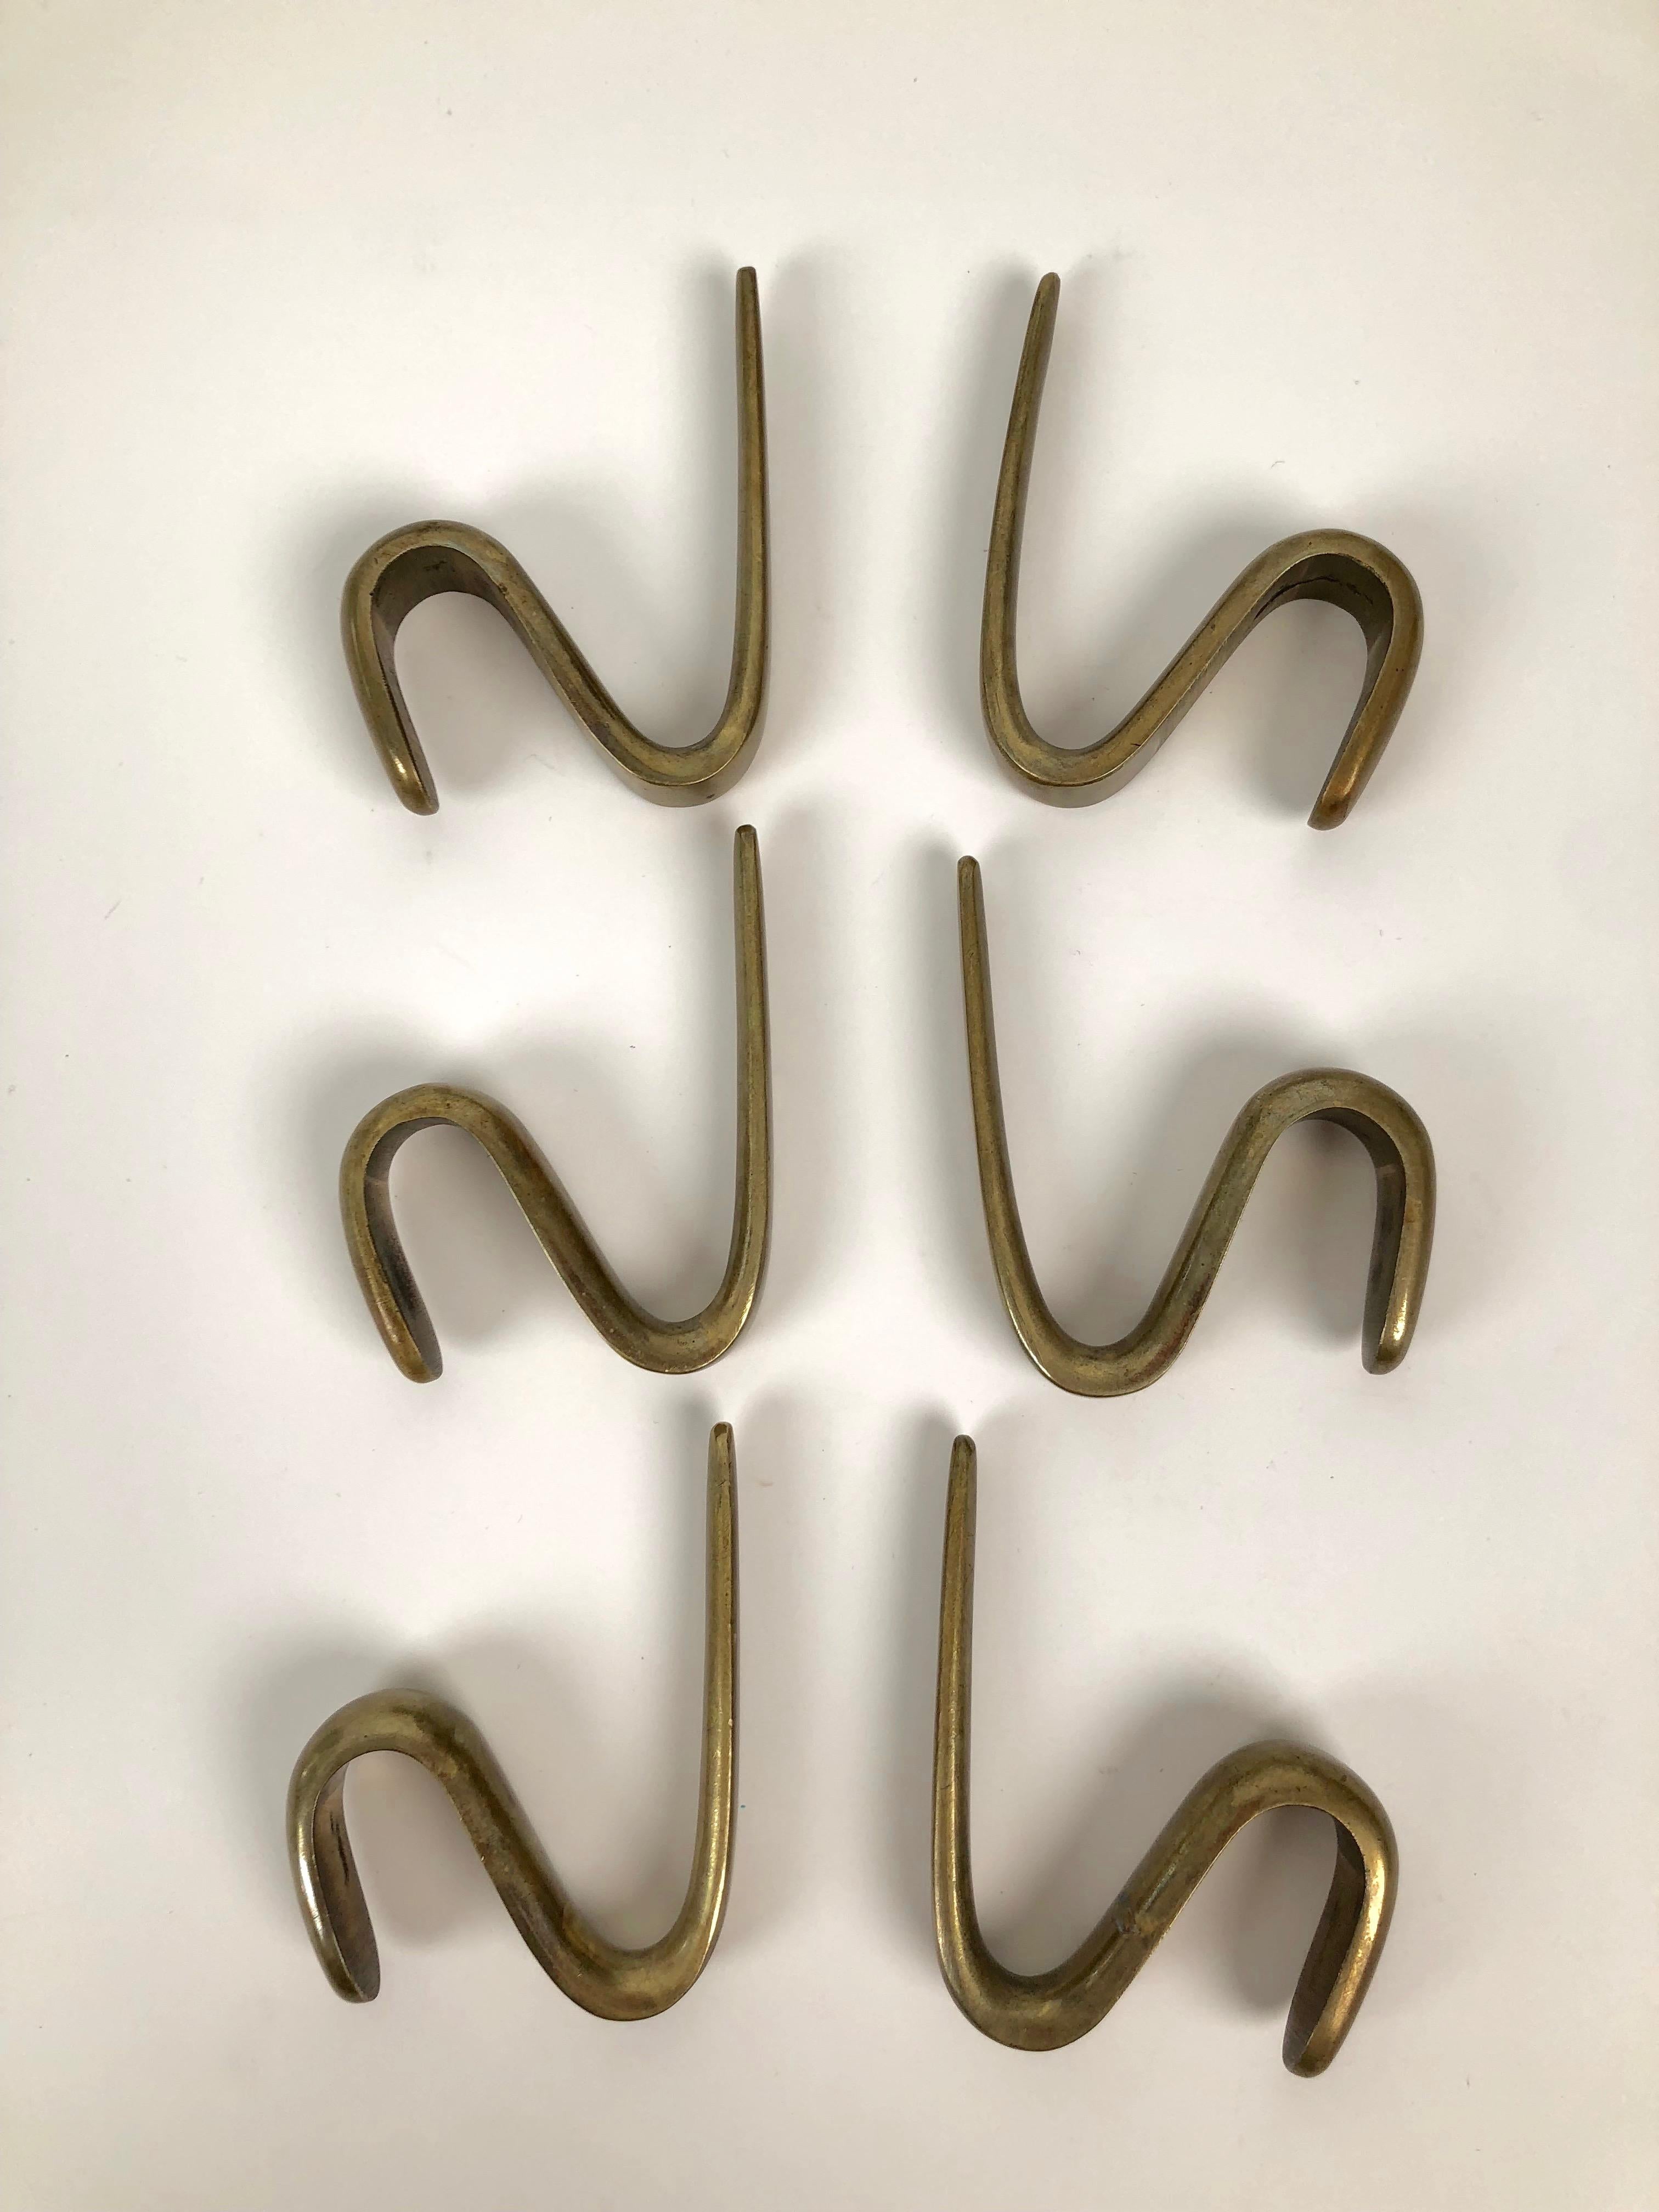 Six midcentury brass coat rack hooks from the 1950s. Based on the catalog, the hooks
were produced between 1950-1959.